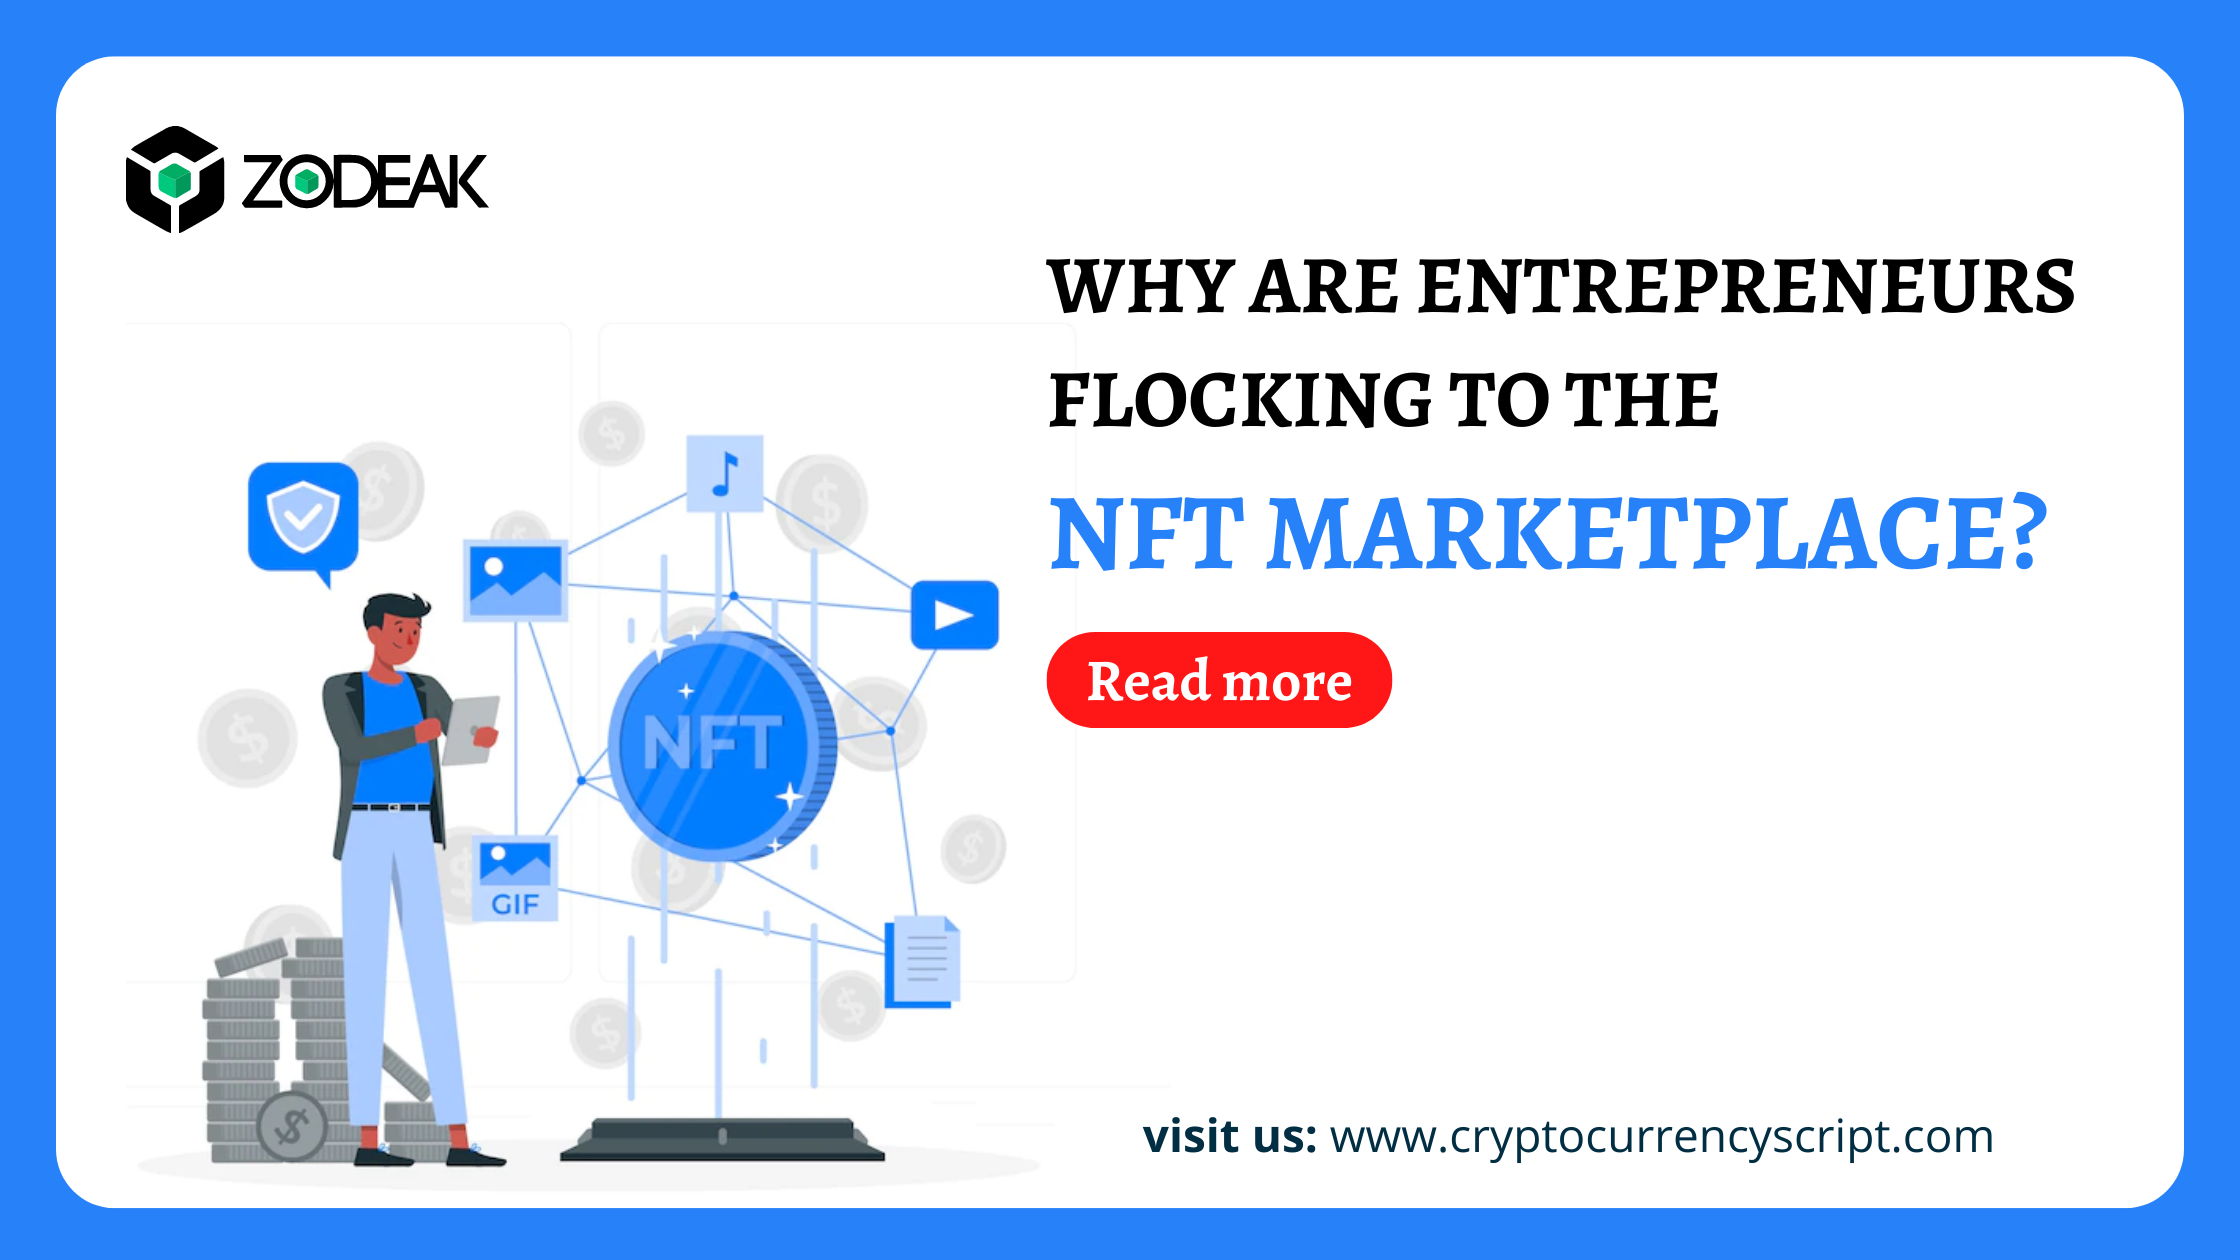 Why are Entrepreneurs Flocking to the NFT Marketplace?